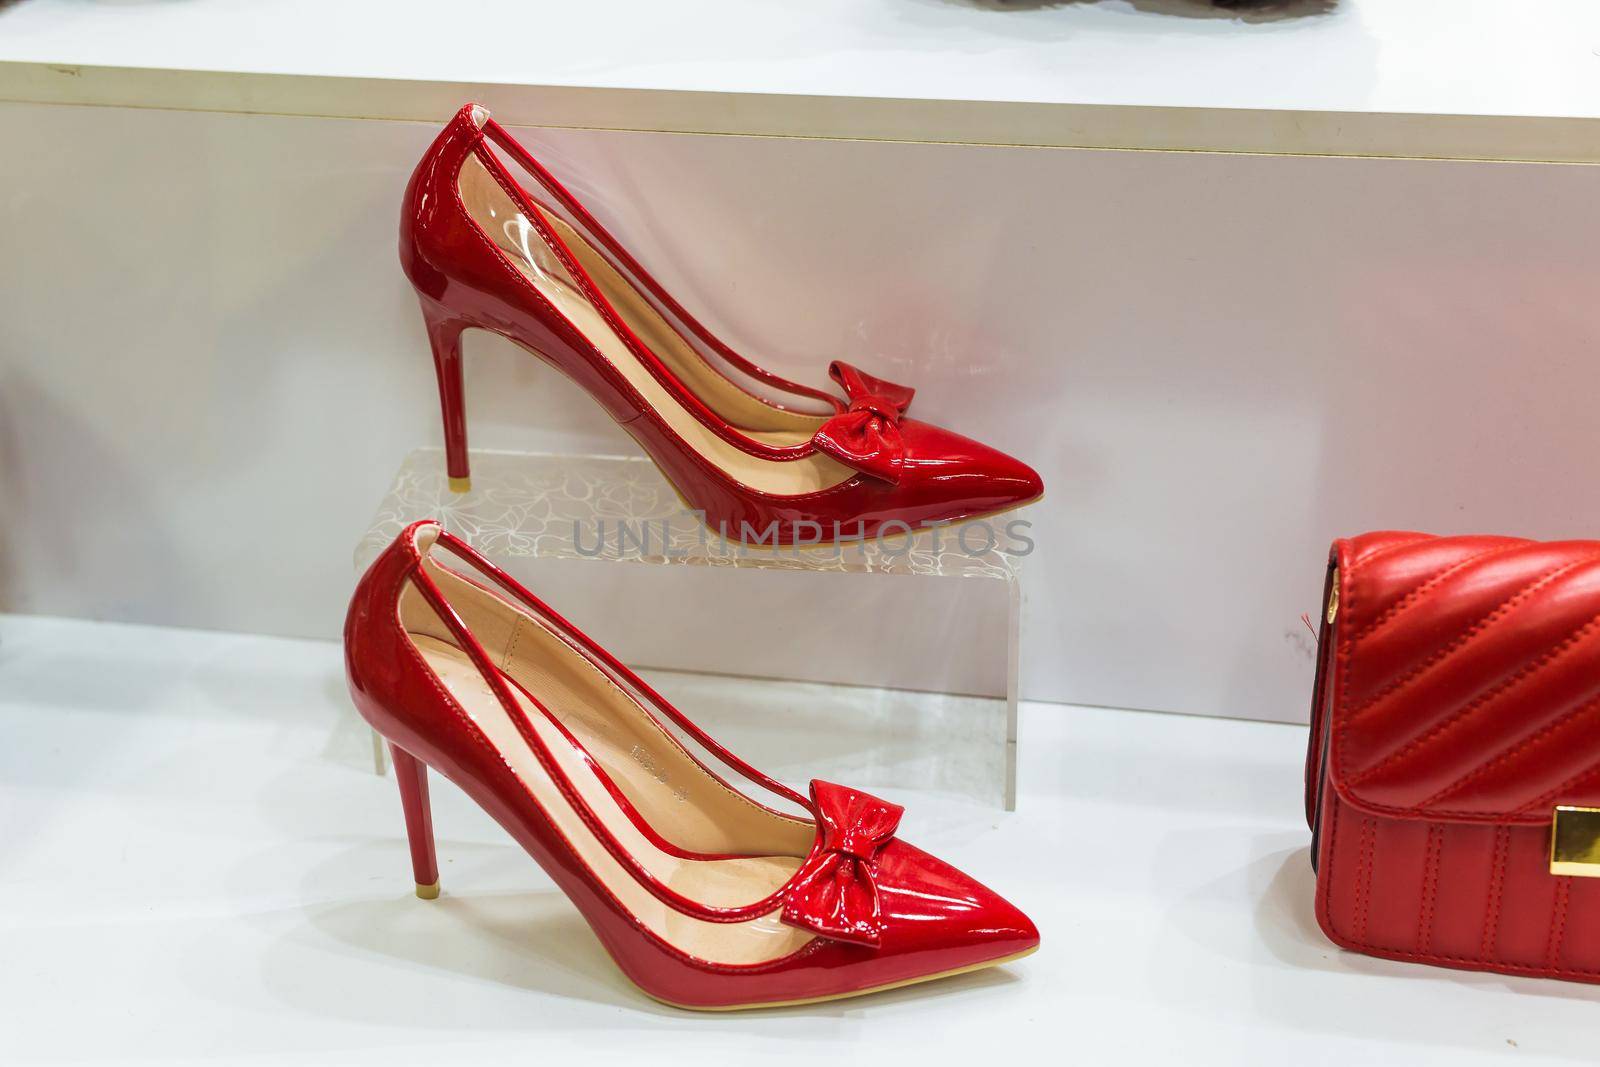 Women's shoes at the shop, red shoes for lady. Fashion, shopping and retail concept. by Satura86